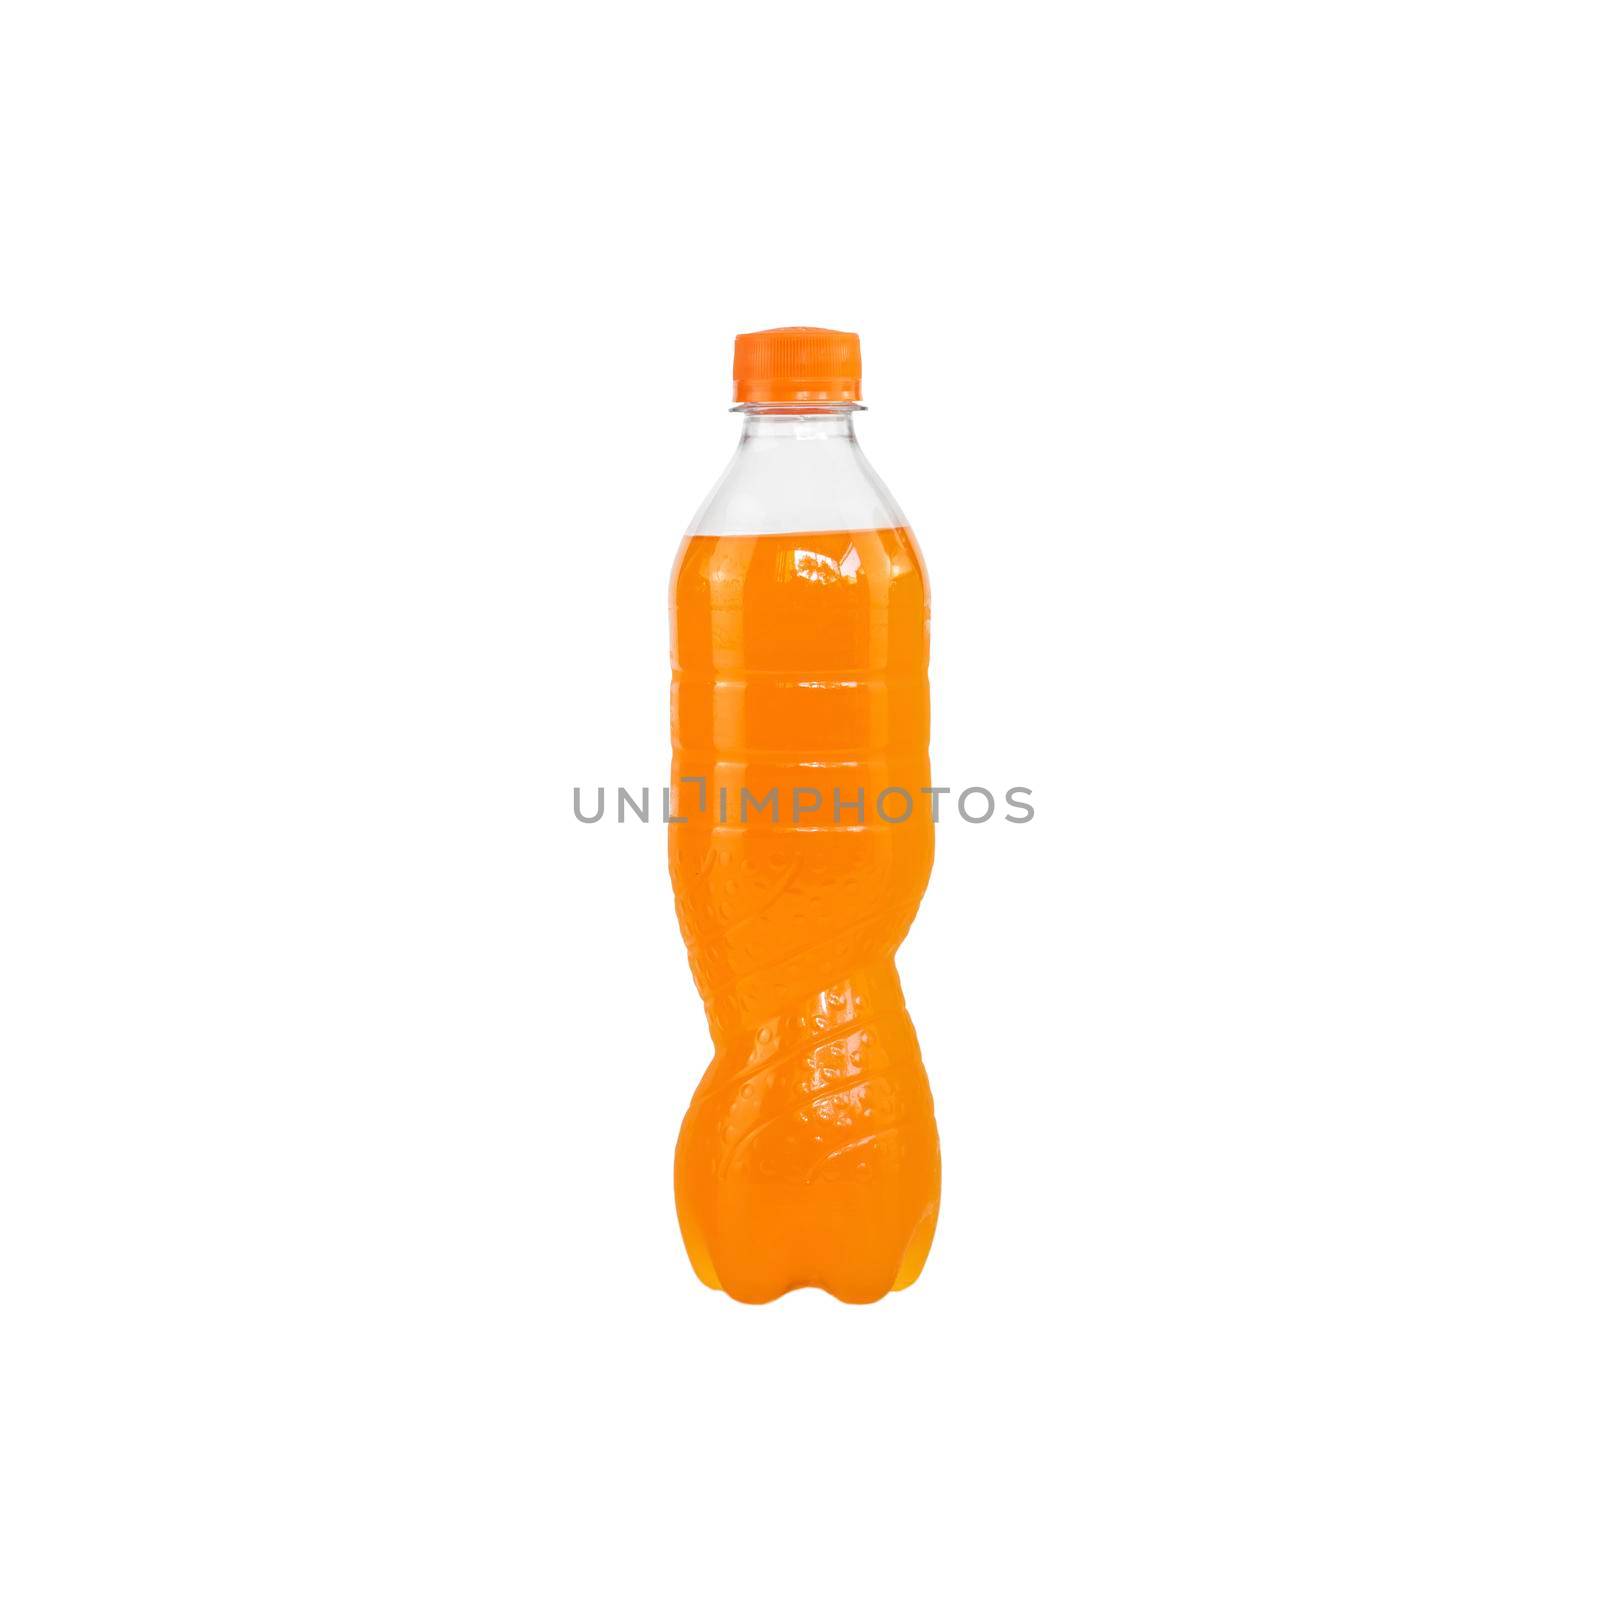 Orange sparkling water in a plastic bottle isolated on white background